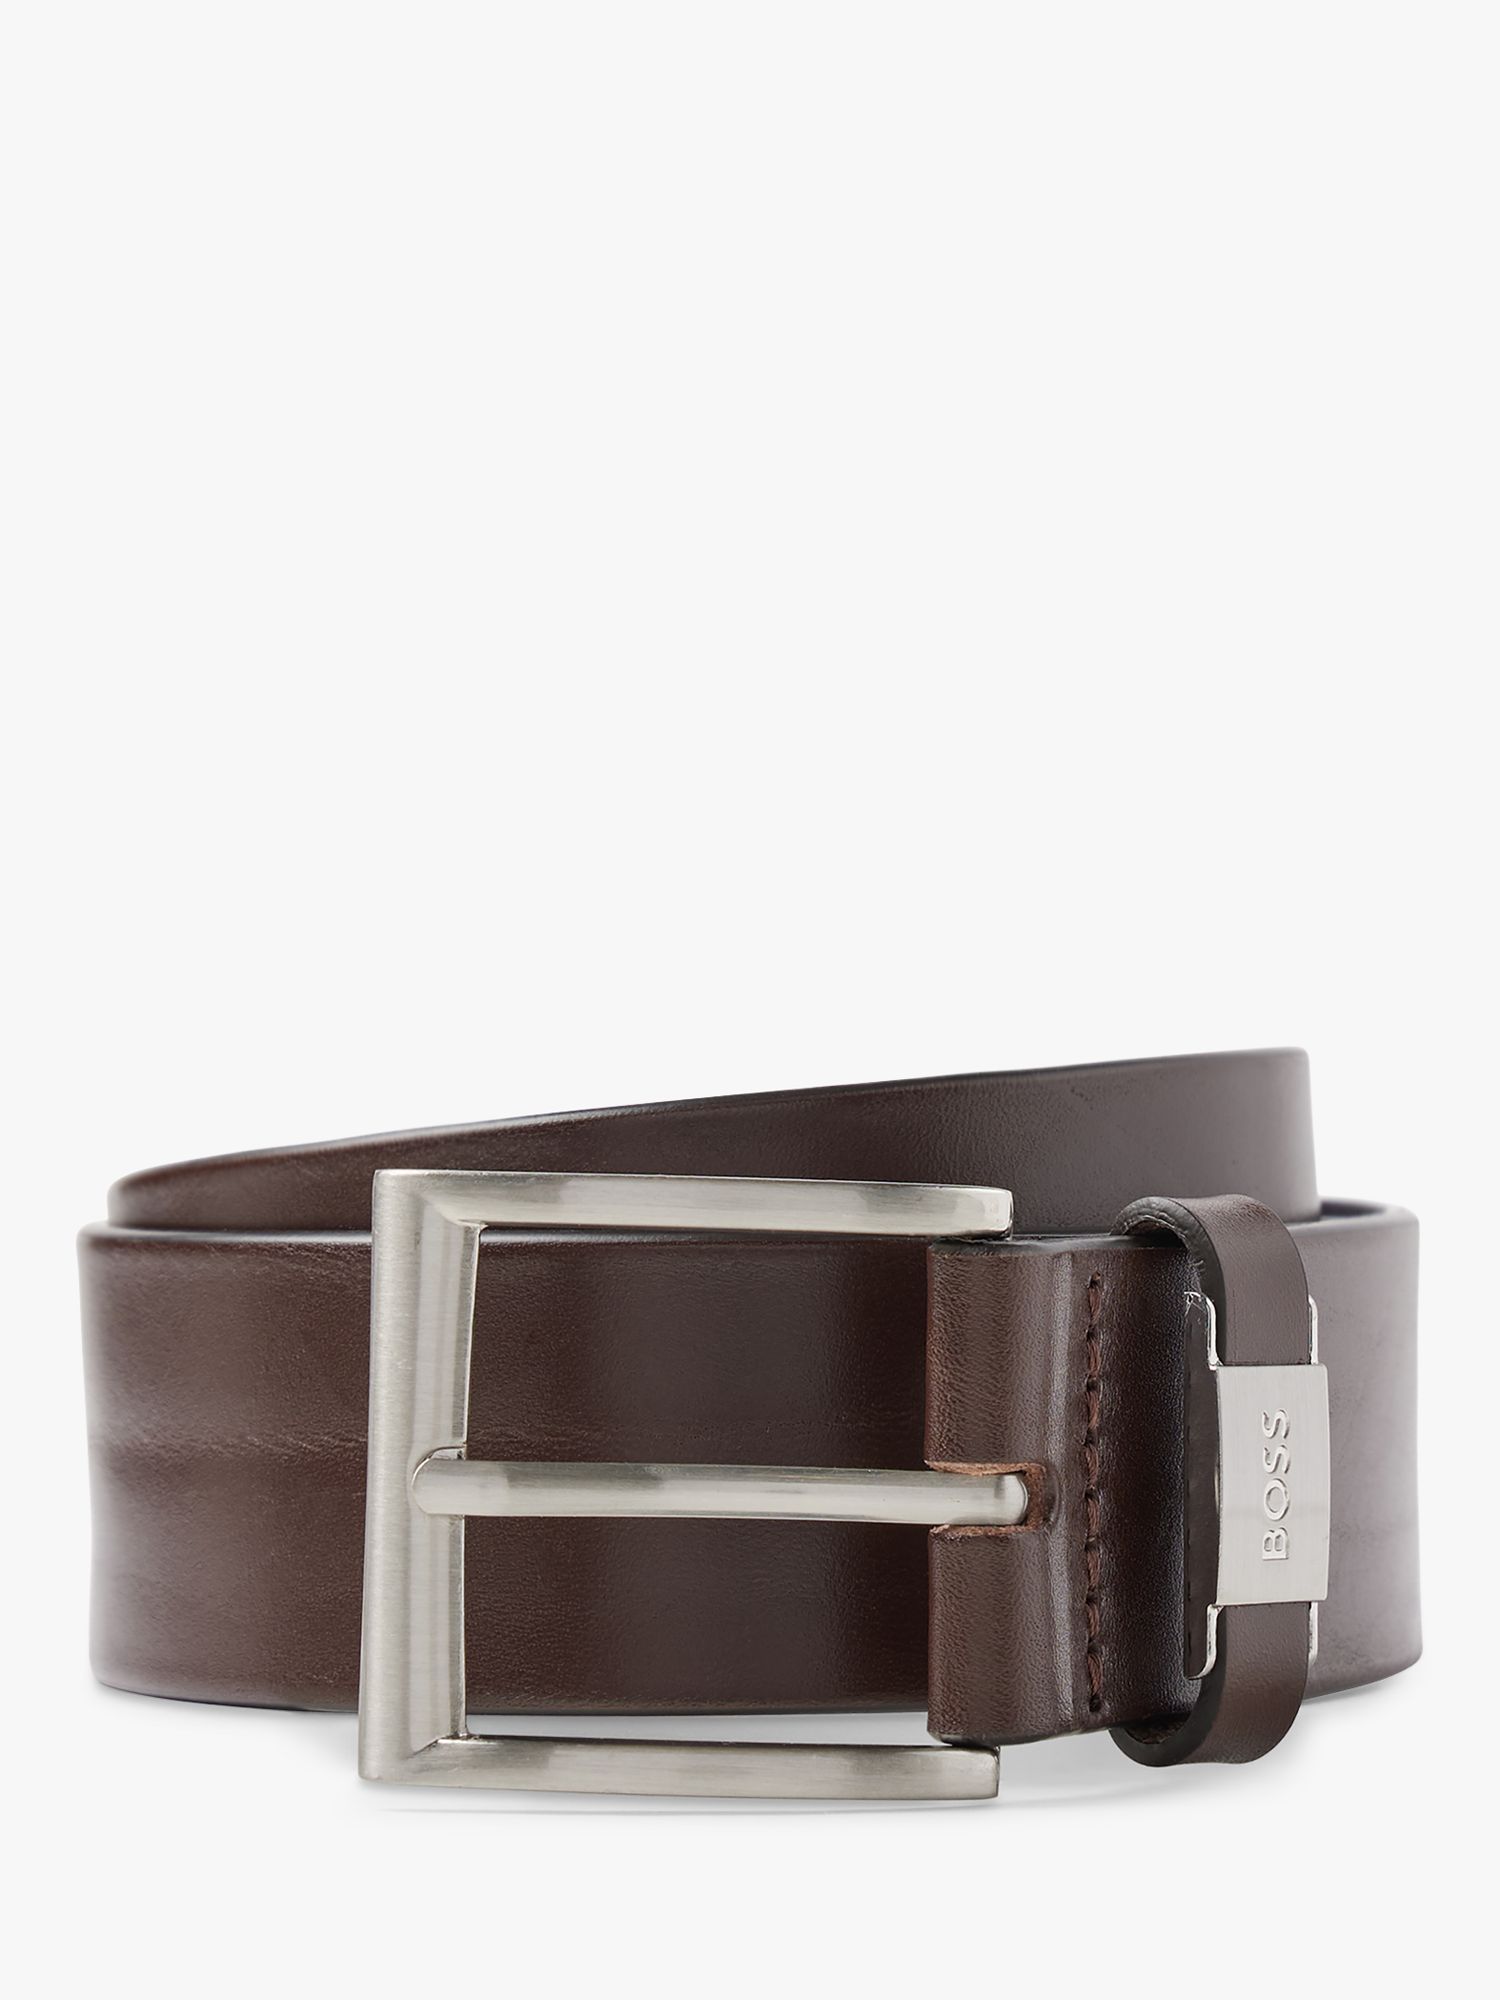 BOSS Connio Leather Belt, Dark Brown at John Lewis & Partners